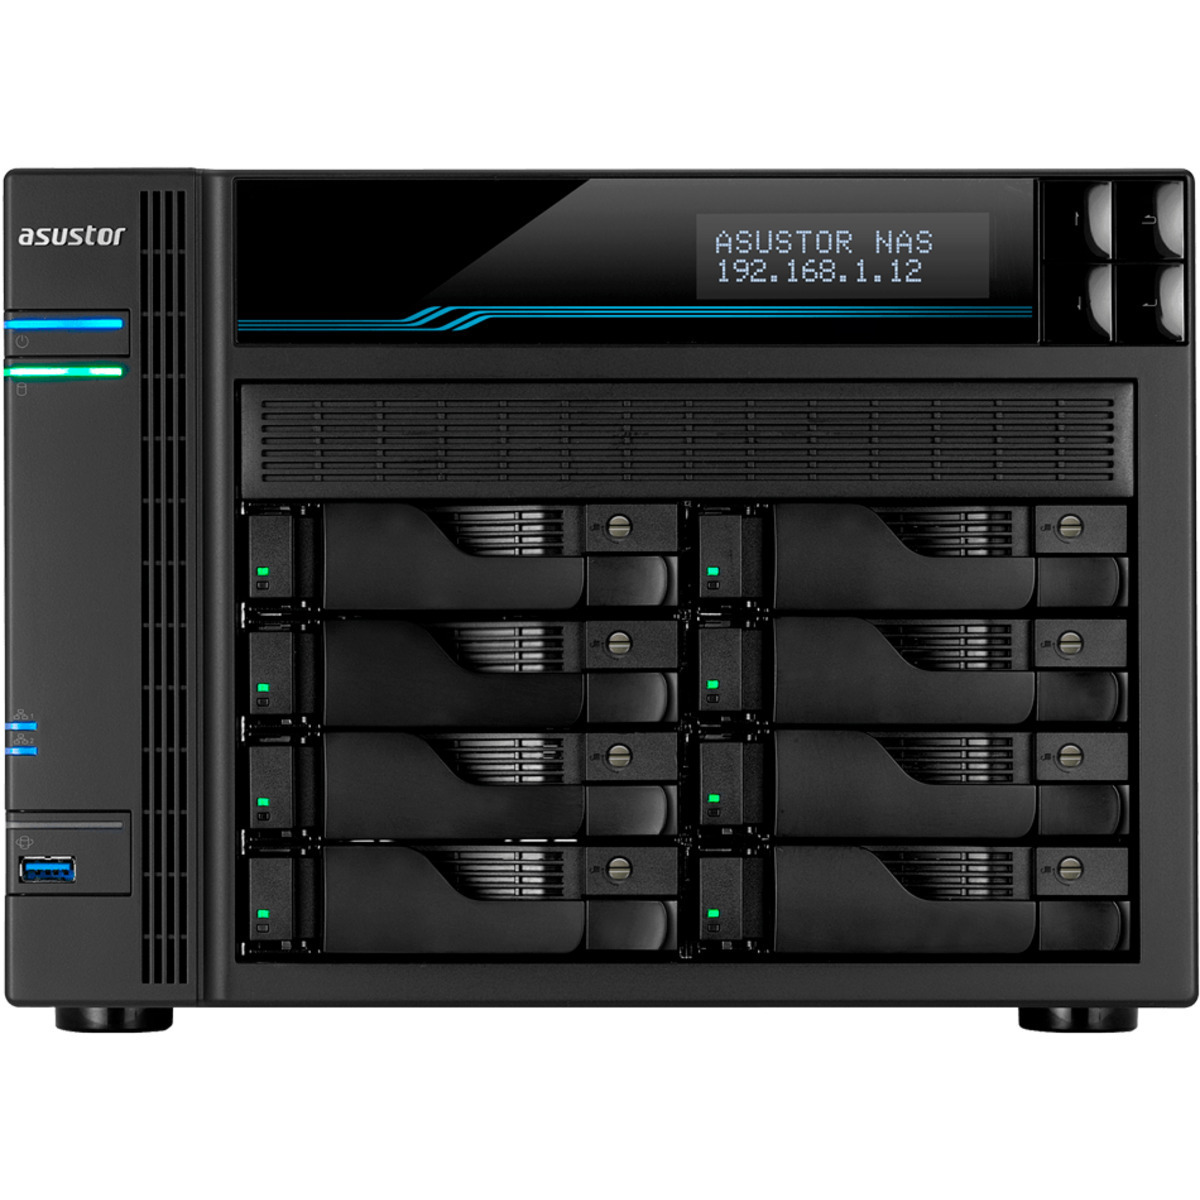 ASUSTOR AS6508T Lockerstor 8 32tb 8-Bay Desktop Multimedia / Power User / Business NAS - Network Attached Storage Device 8x4tb Samsung 870 EVO MZ-77E4T0BAM 2.5 560/530MB/s SATA 6Gb/s SSD CONSUMER Class Drives Installed - Burn-In Tested - ON SALE - FREE RAM UPGRADE AS6508T Lockerstor 8